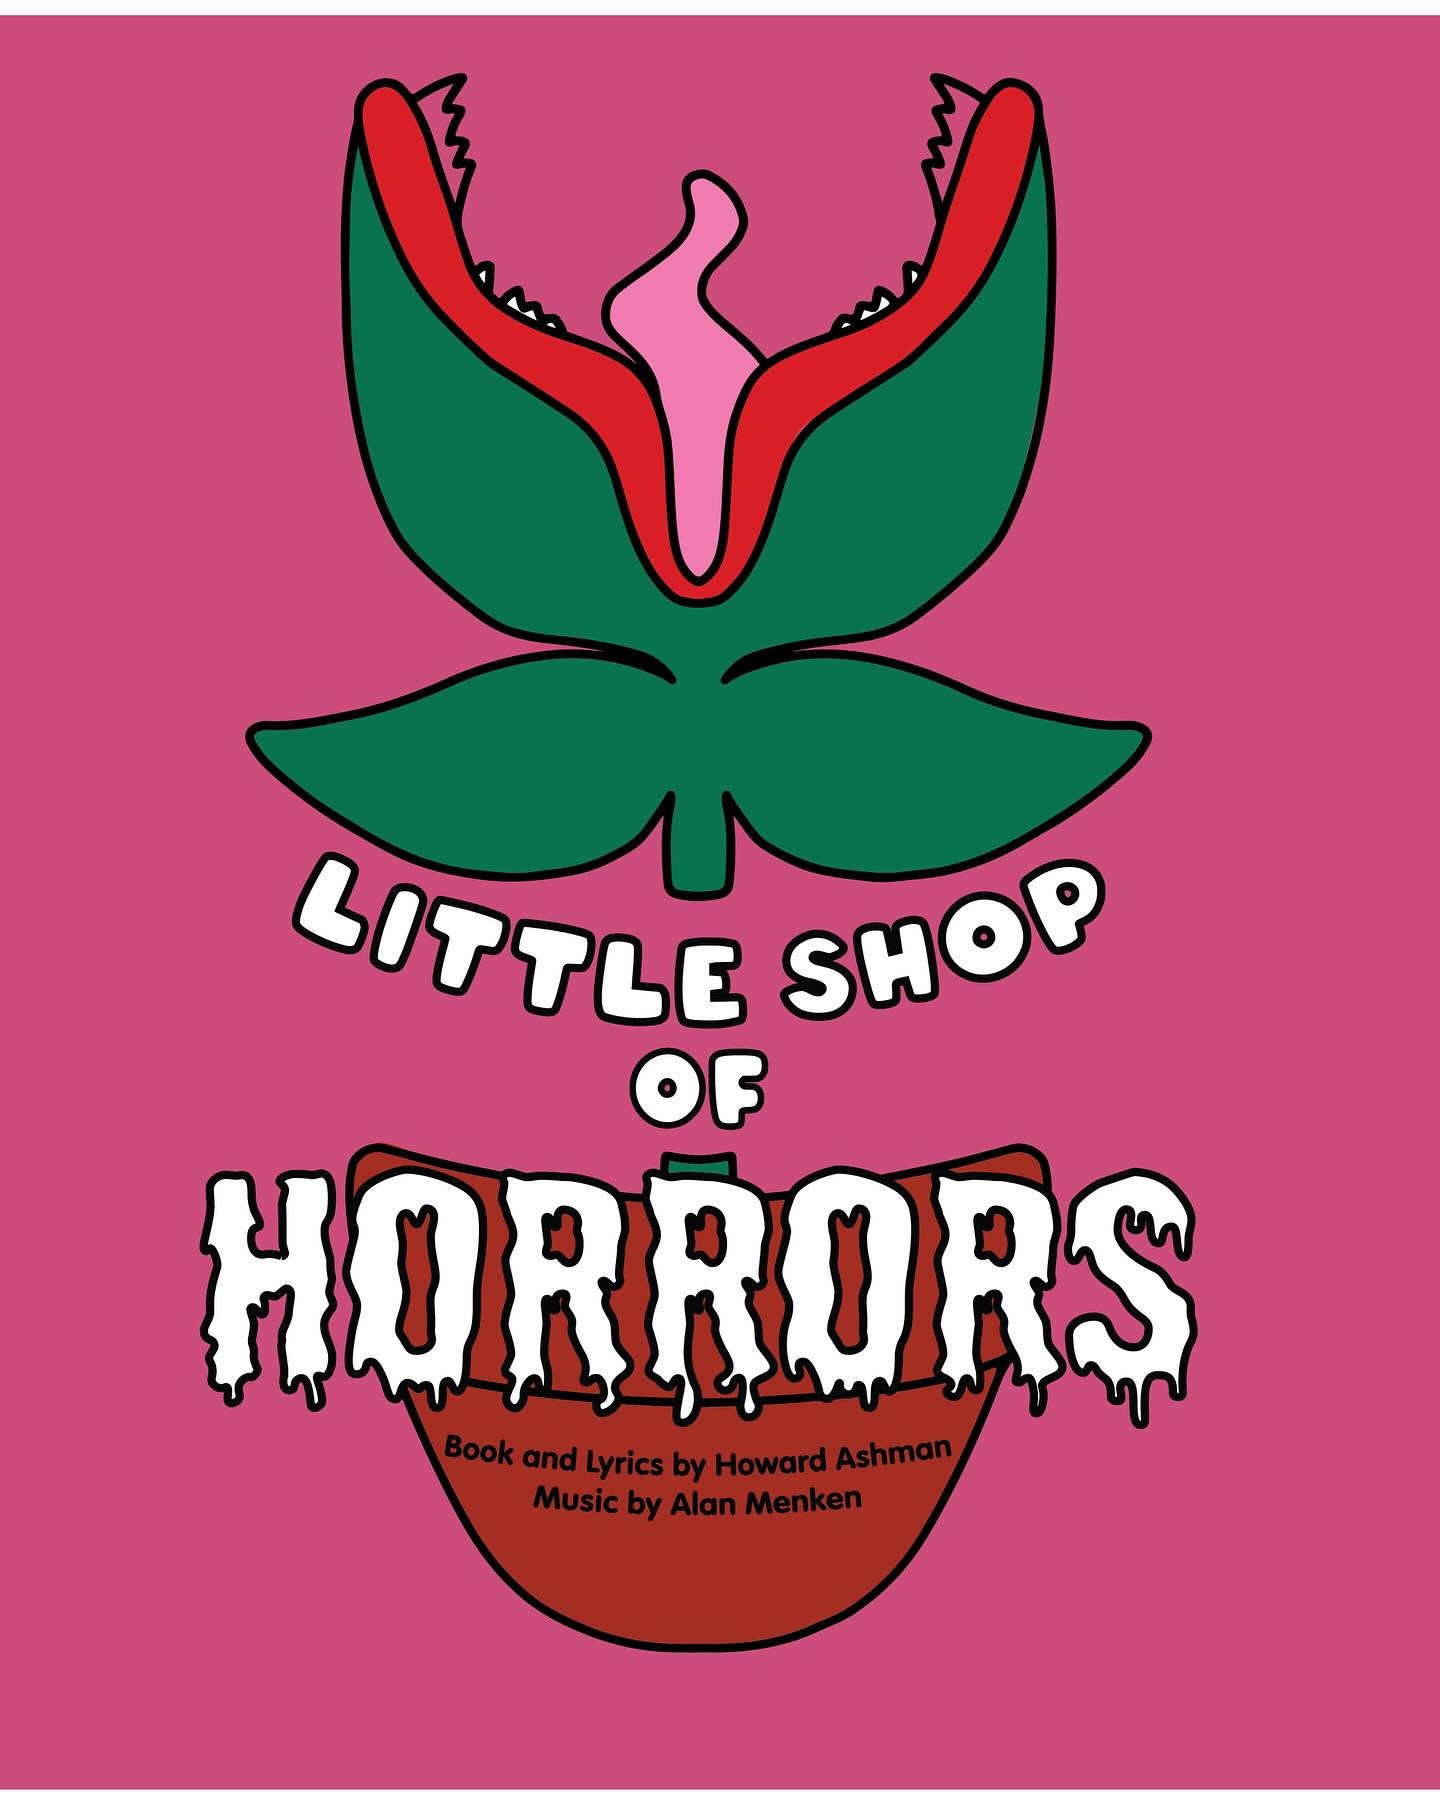 May be a doodle of text that says 'LITTLE SHOP OF HORRORS Book and Lyrics byHoward BookandLyricsbyHowardAshmar by Ashman Music MusicbyAlanMenken by Alan Menken'